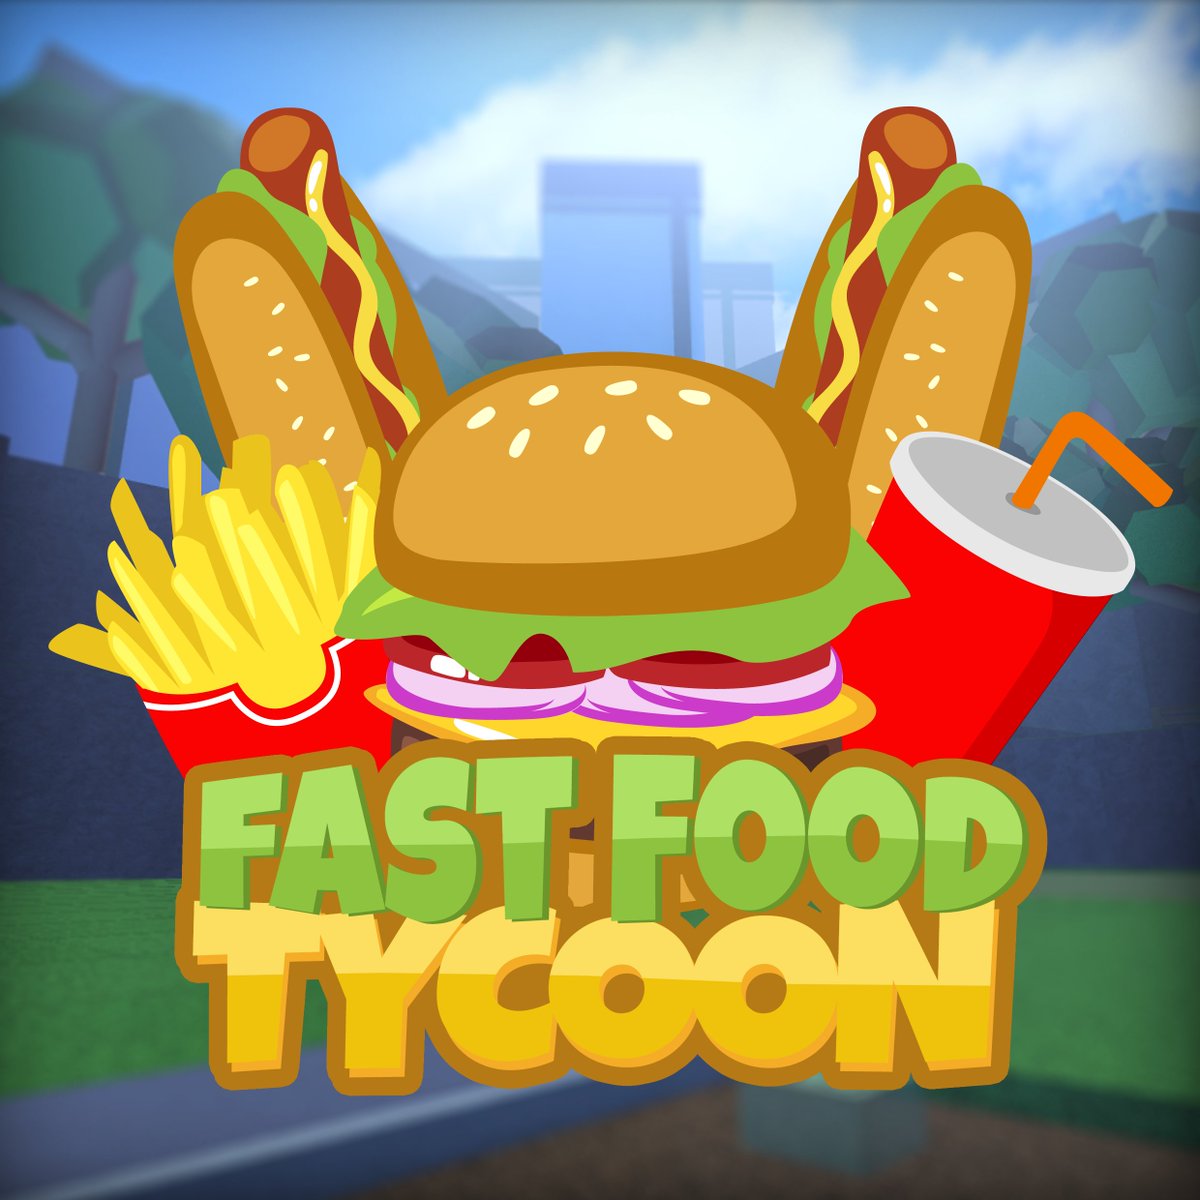 Level Up Studios On Twitter We Re Very Pleased And Excited To Announce Fast Food Tycoon Coming Soon To You Paid Access Date Will Be Announced Soon Roblox Robloxdev Https T Co 4marafhegm - junk food tycoon 2 roblox